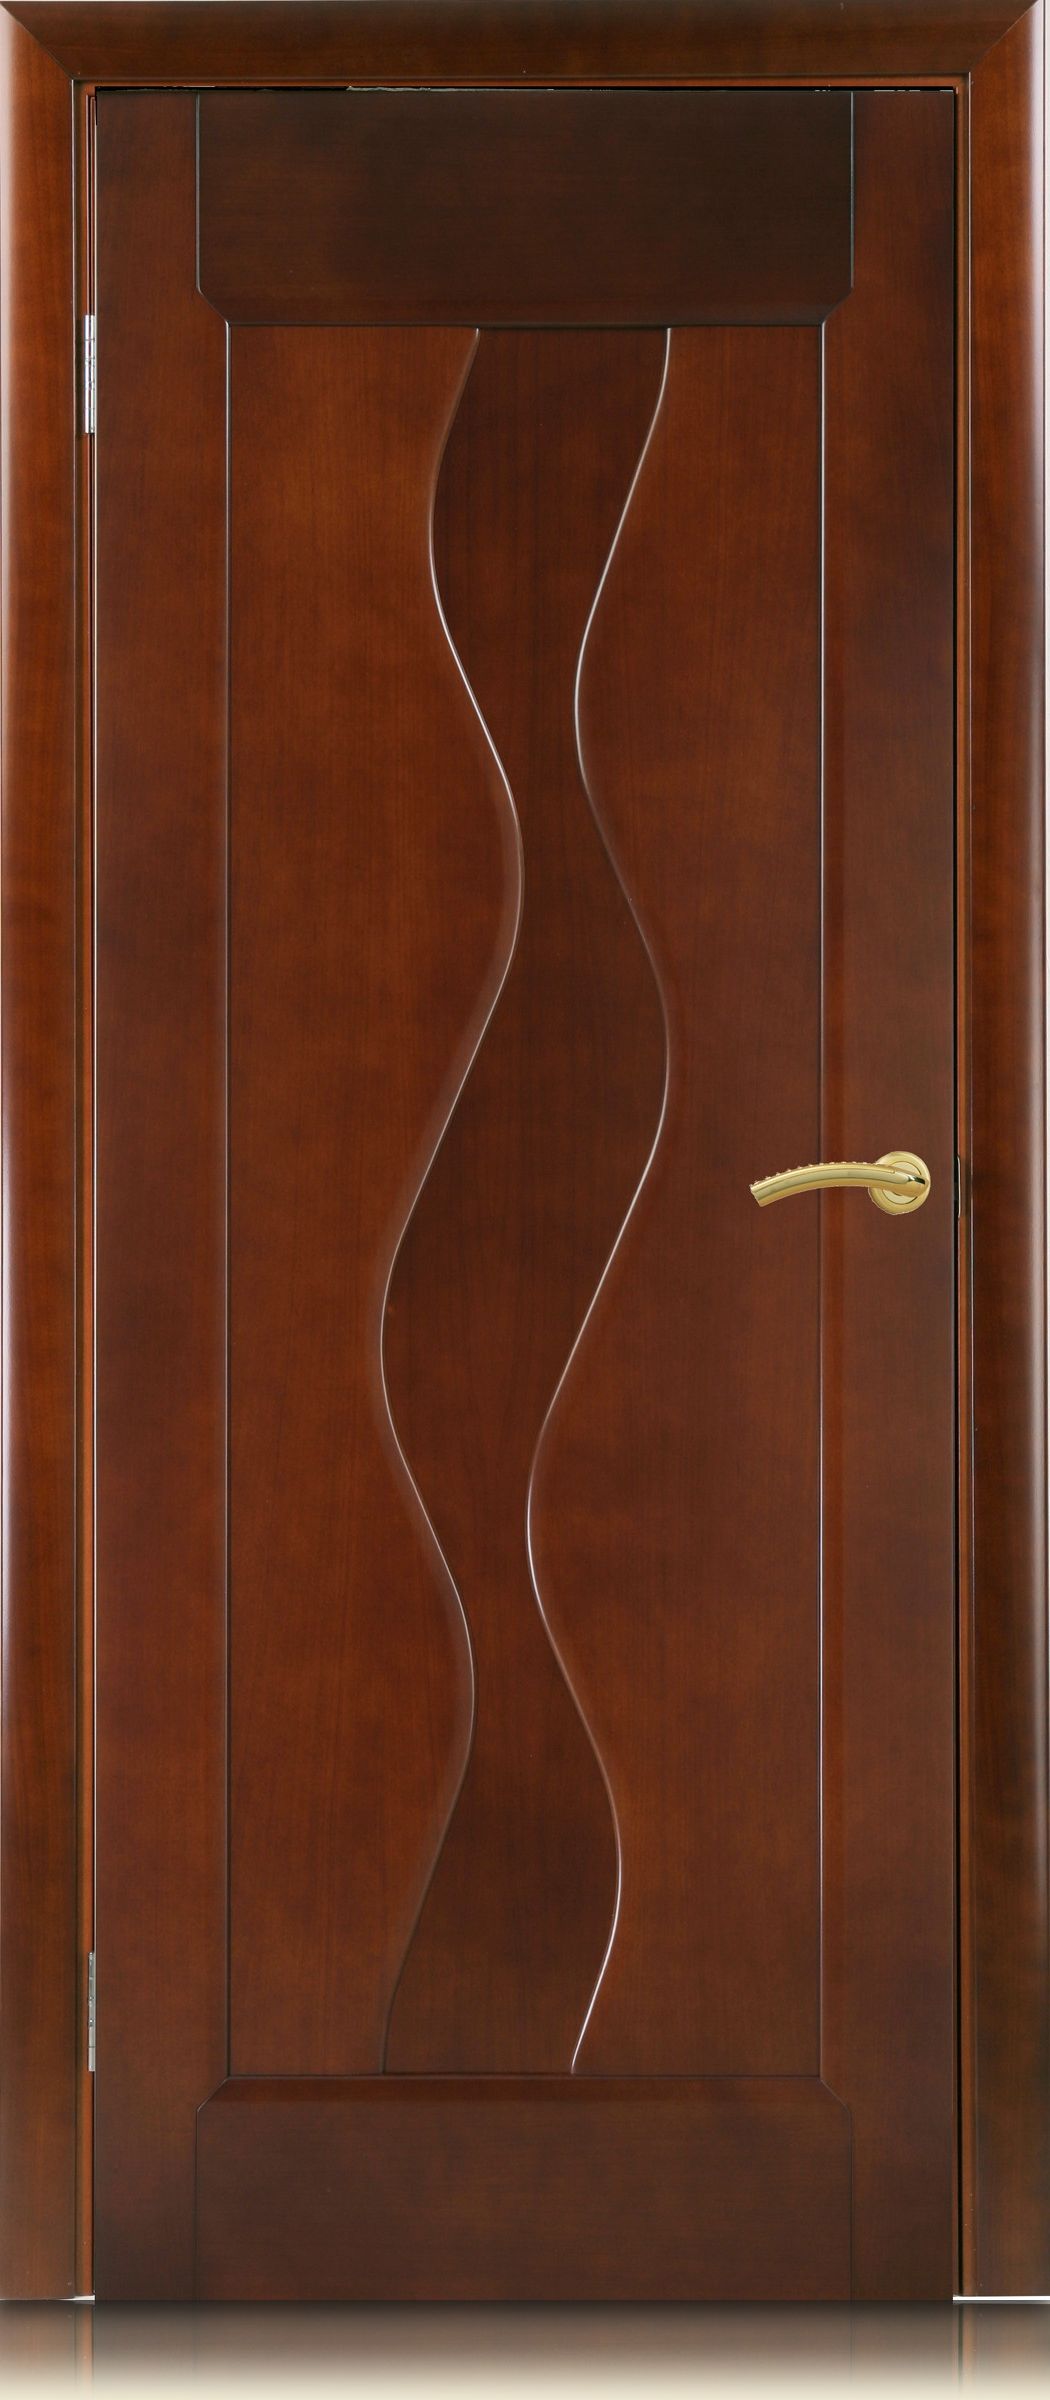 Classic wooden door with frosted glass